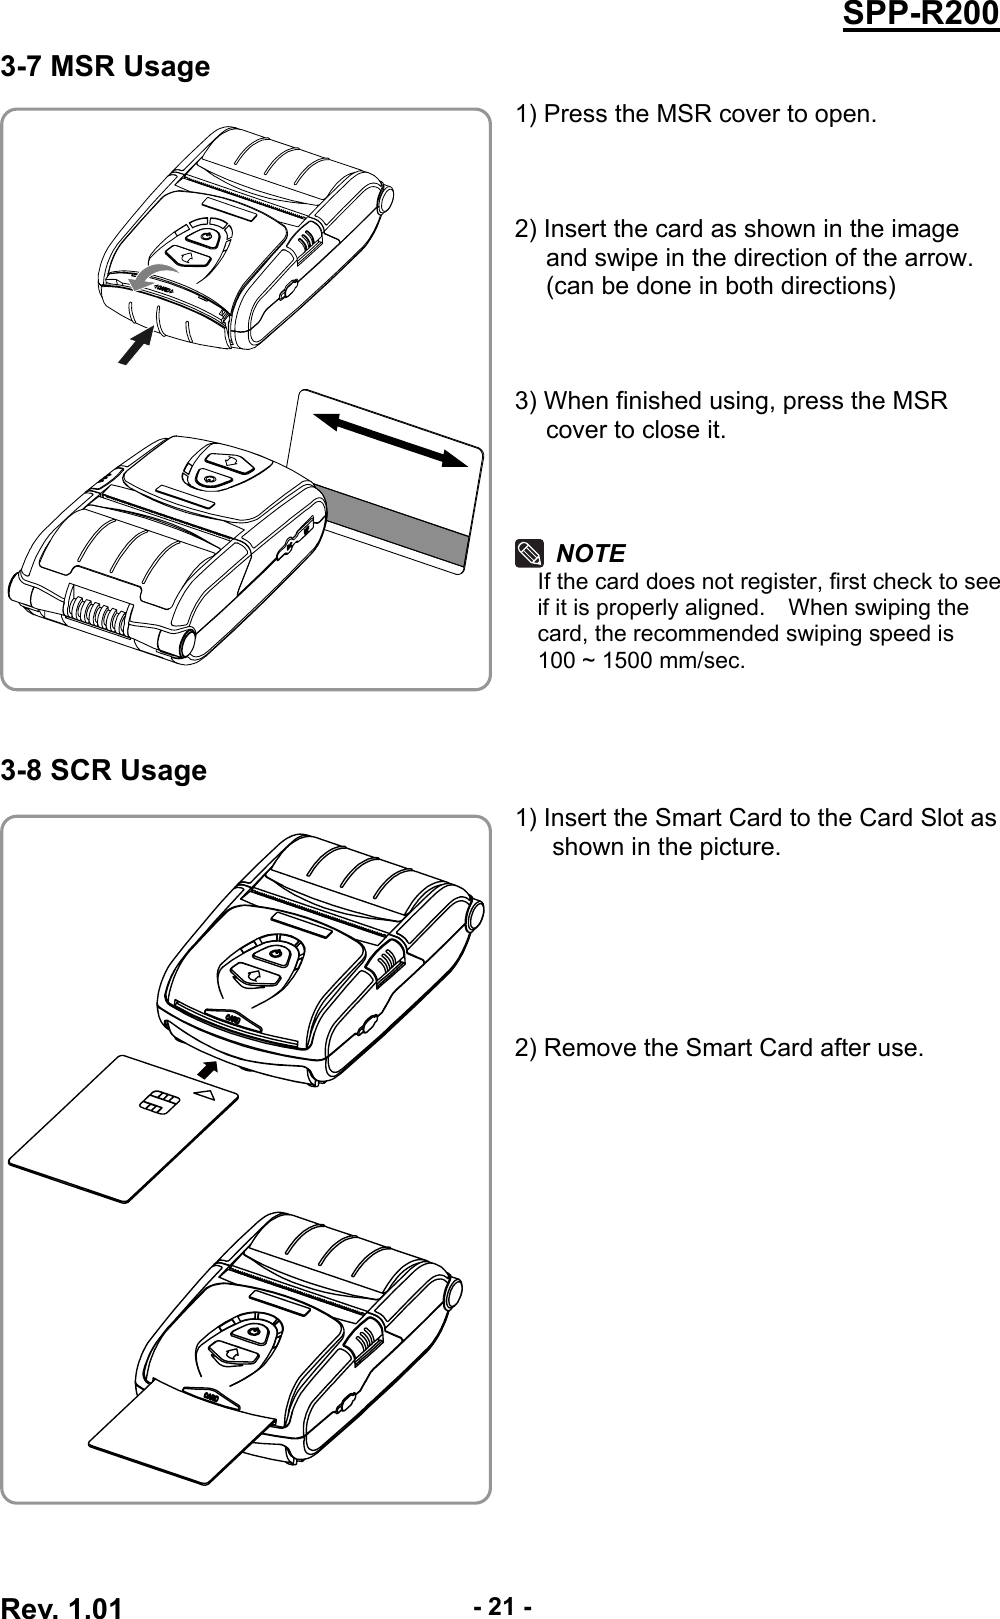  Rev. 1.01  - 21 -SPP-R2003-7 MSR Usage 1) Press the MSR cover to open.    2) Insert the card as shown in the image and swipe in the direction of the arrow. (can be done in both directions)    3) When finished using, press the MSR cover to close it.    NOTE If the card does not register, first check to see if it is properly aligned.    When swiping the card, the recommended swiping speed is   100 ~ 1500 mm/sec.    3-8 SCR Usage 1) Insert the Smart Card to the Card Slot as shown in the picture.         2) Remove the Smart Card after use.     